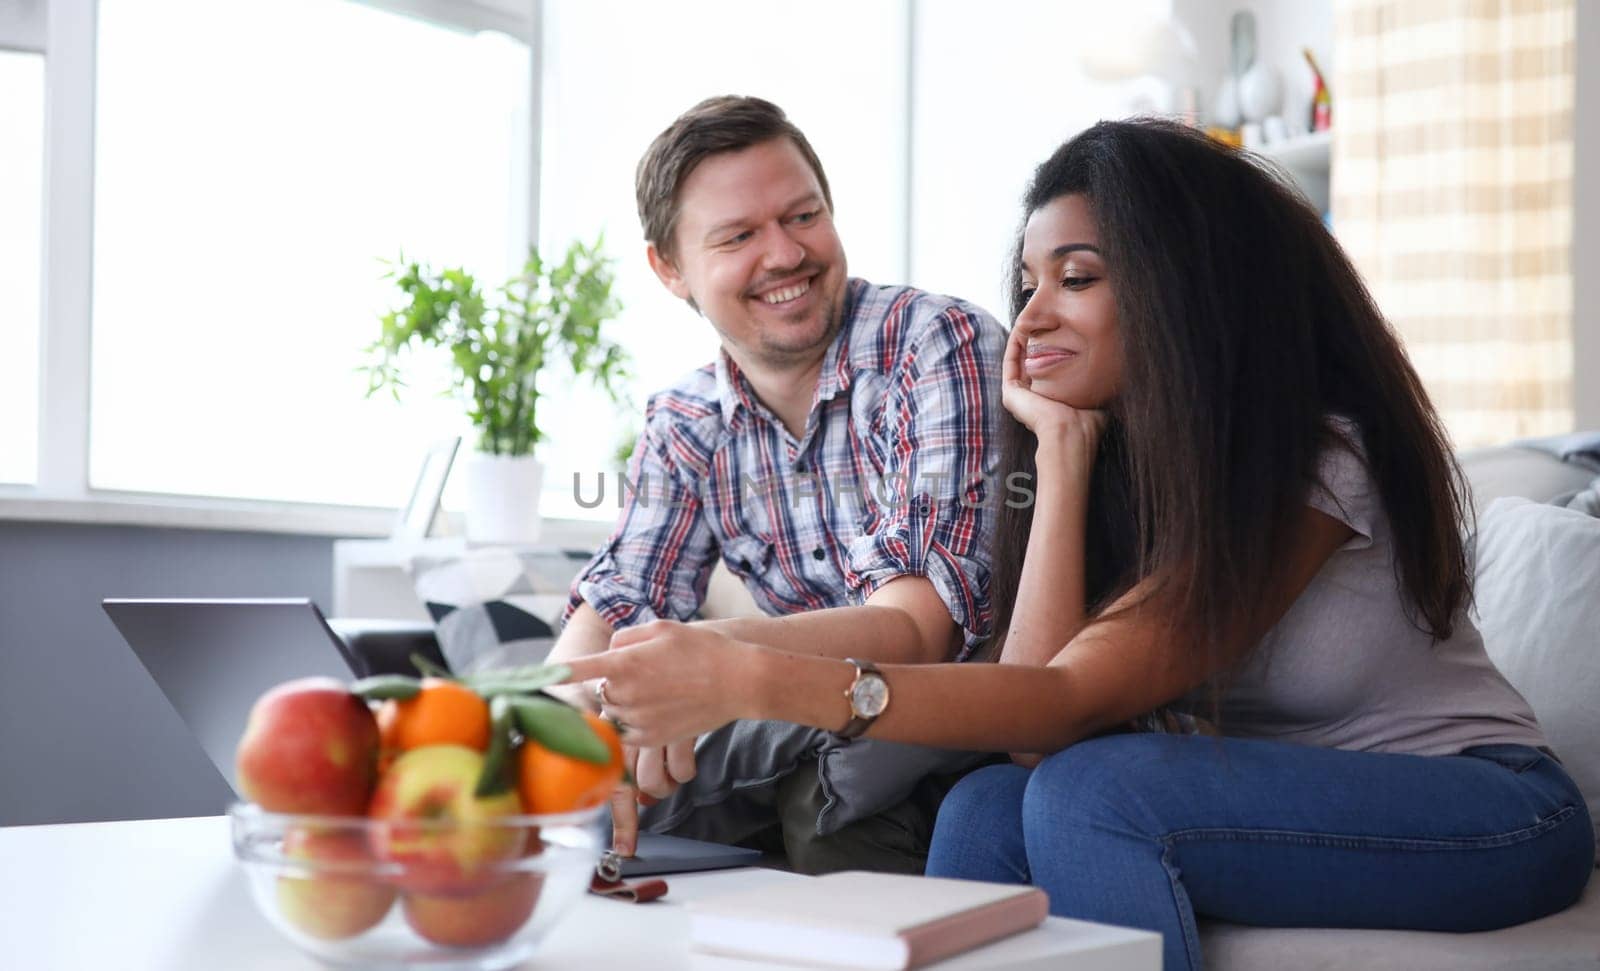 Happy couple talking at home at table on couch. Husband and wife at home looking at each other. Beautiful smiling girl touches fruit on table. Joyful discussion family issues at home